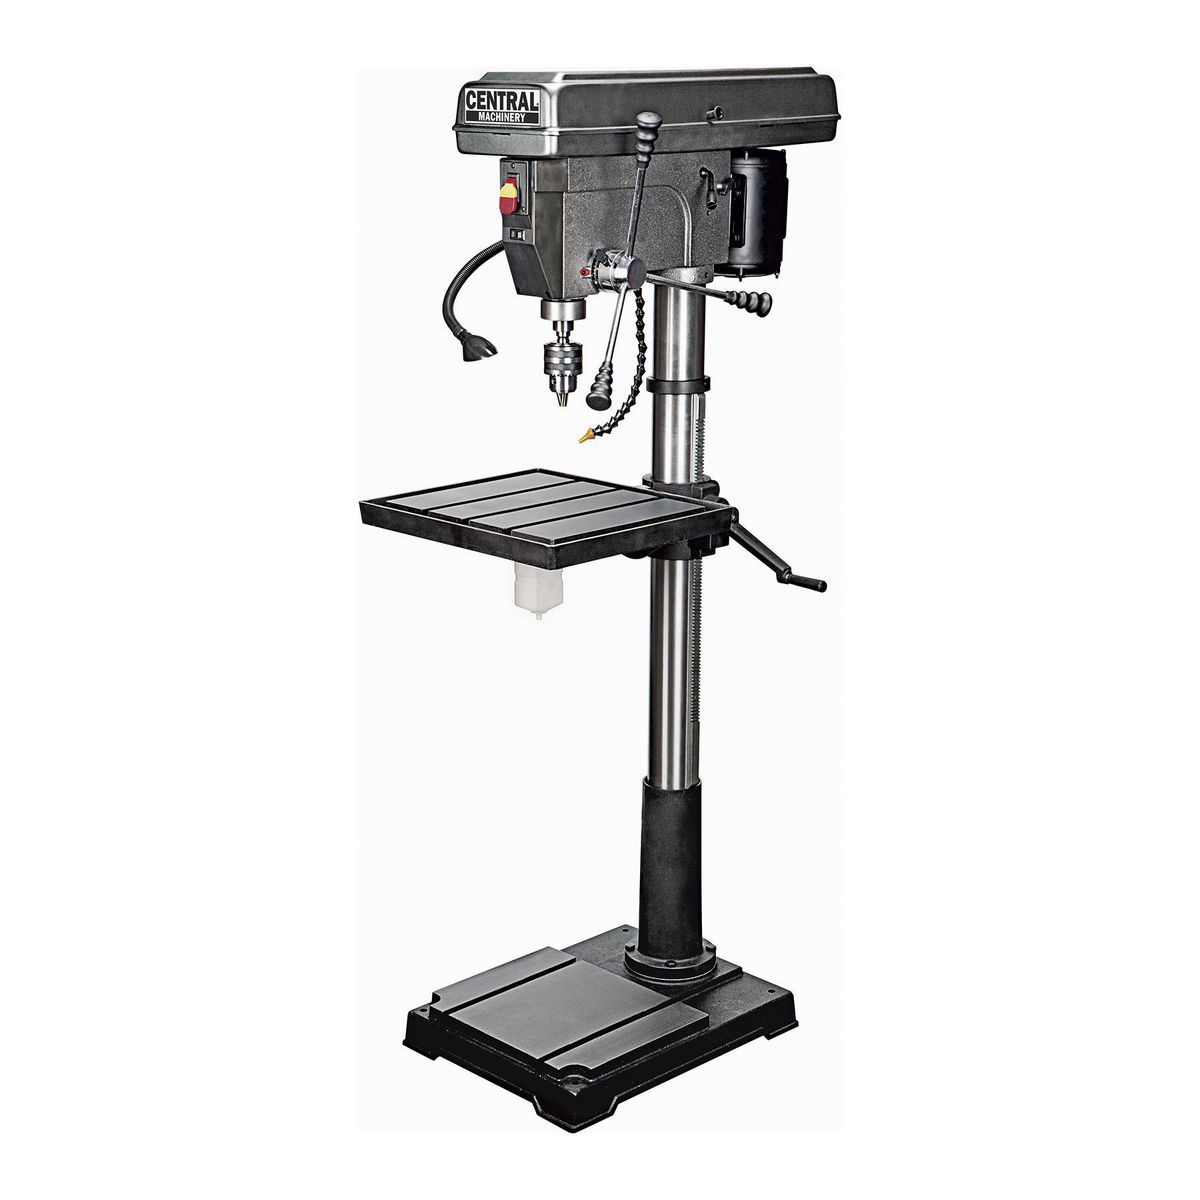 CENTRAL MACHINERY Floor Drill Press - 12 Speed